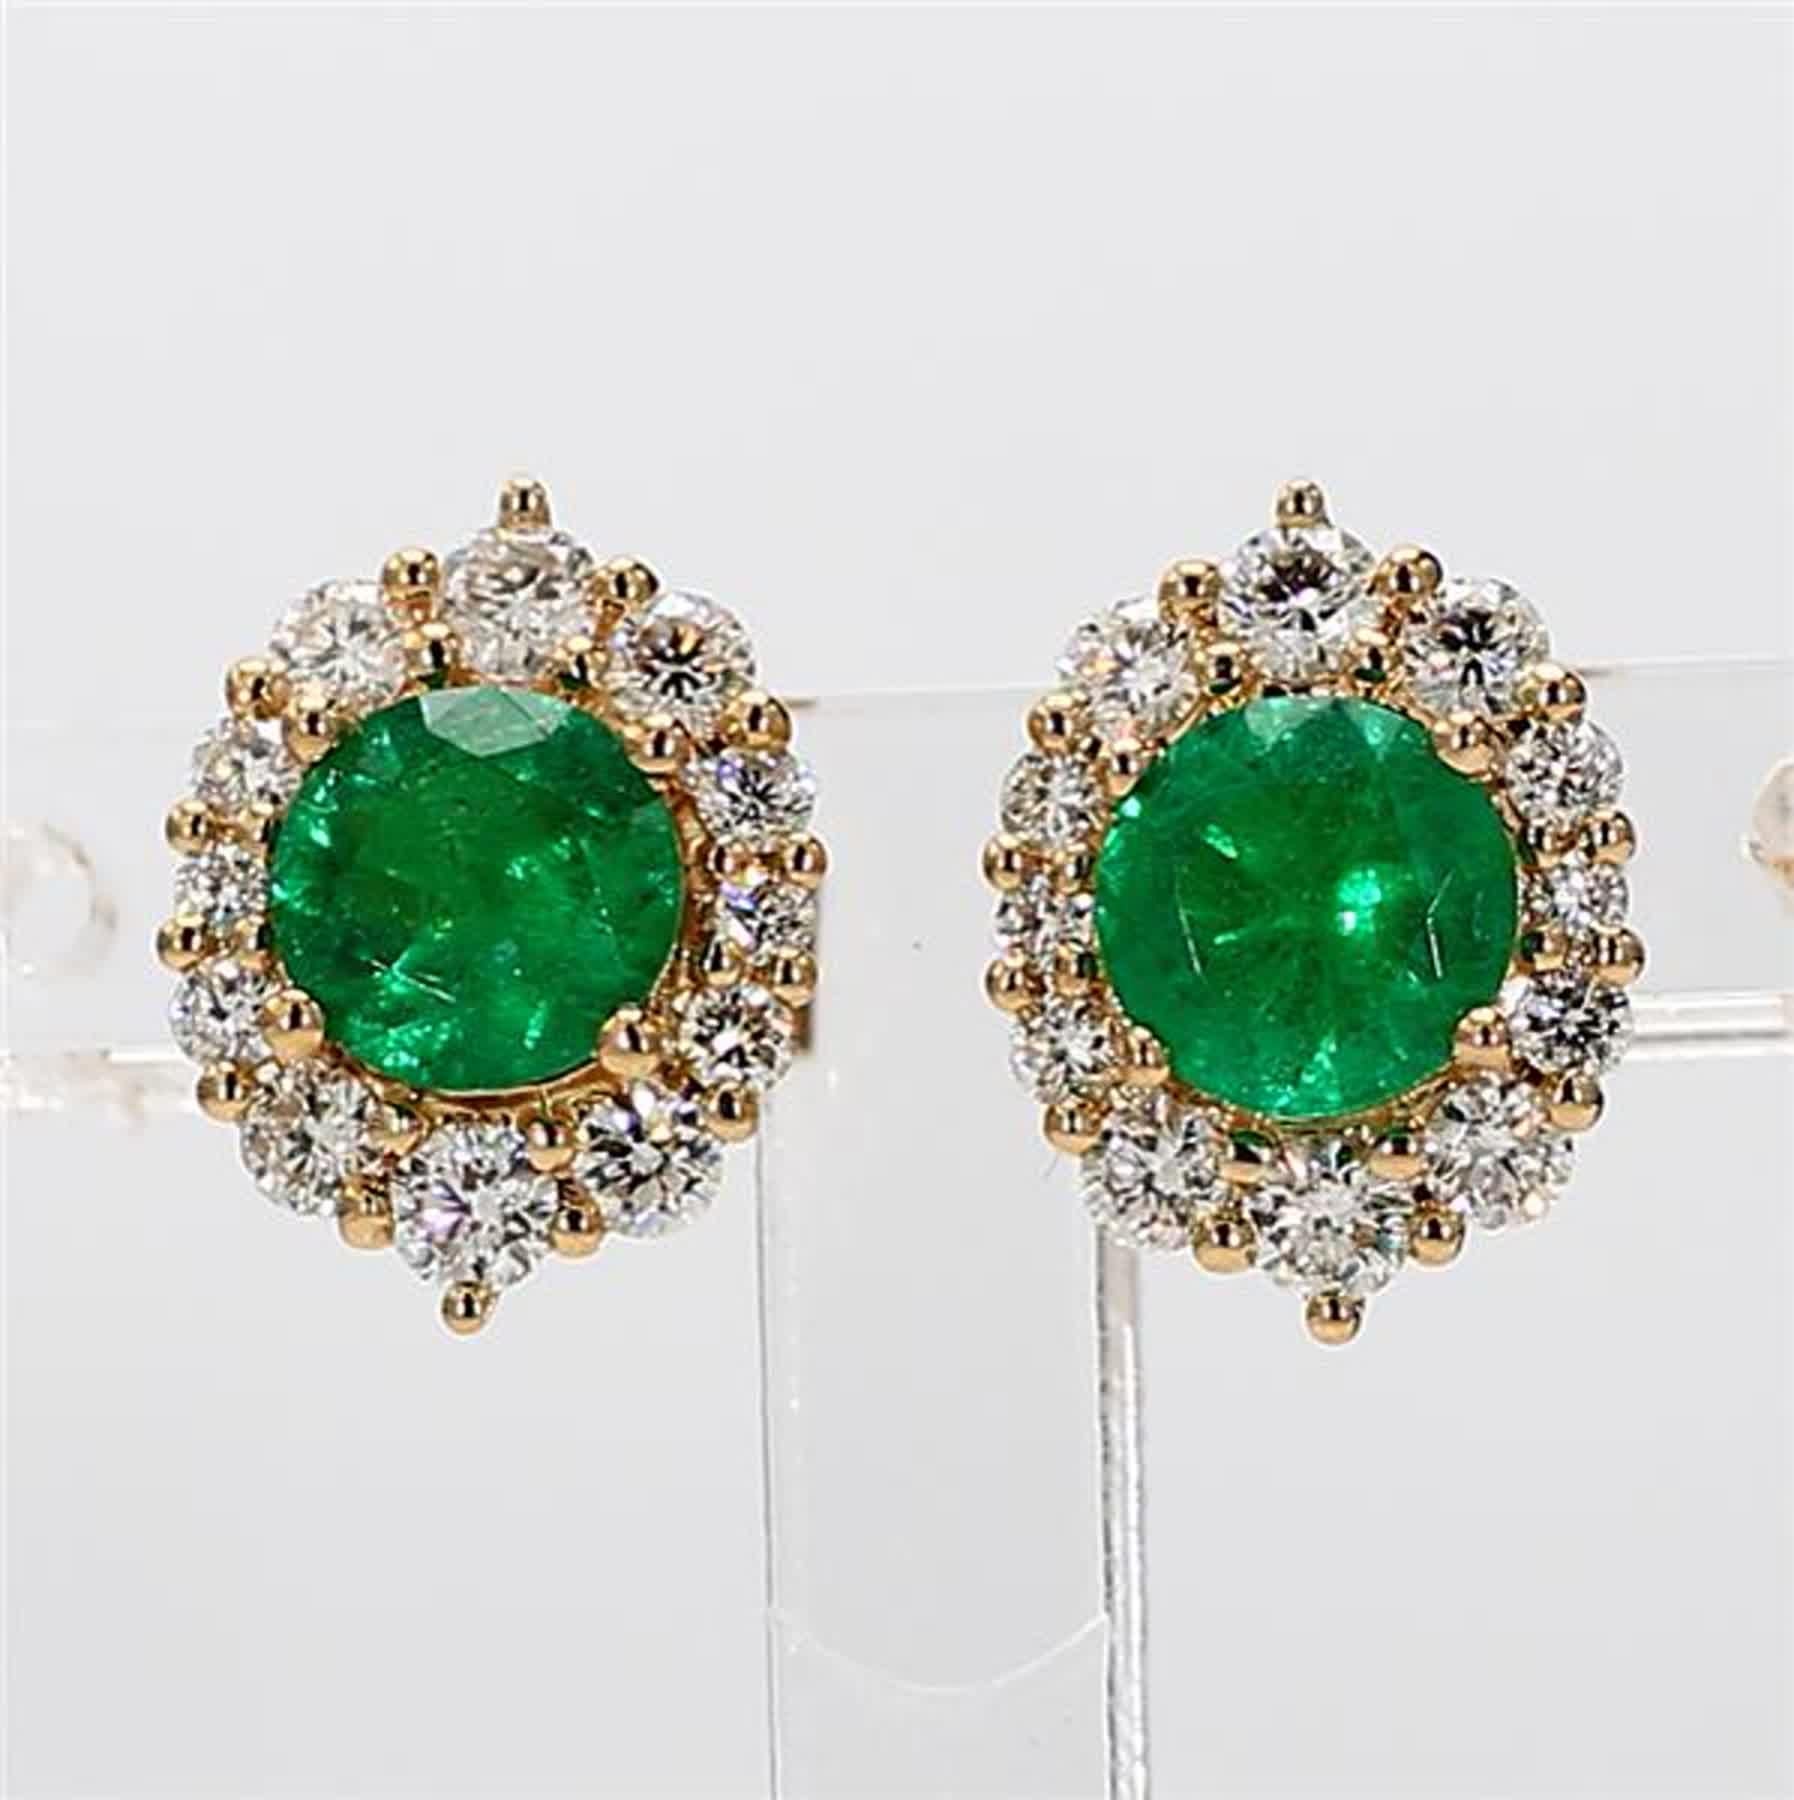 RareGemWorld's classic natural round cut emerald earrings. Mounted in a beautiful 14K Yellow Gold setting with natural round cut green emerald's. The emerald's are surrounded by natural round white diamond melee in a beautiful single halo. These